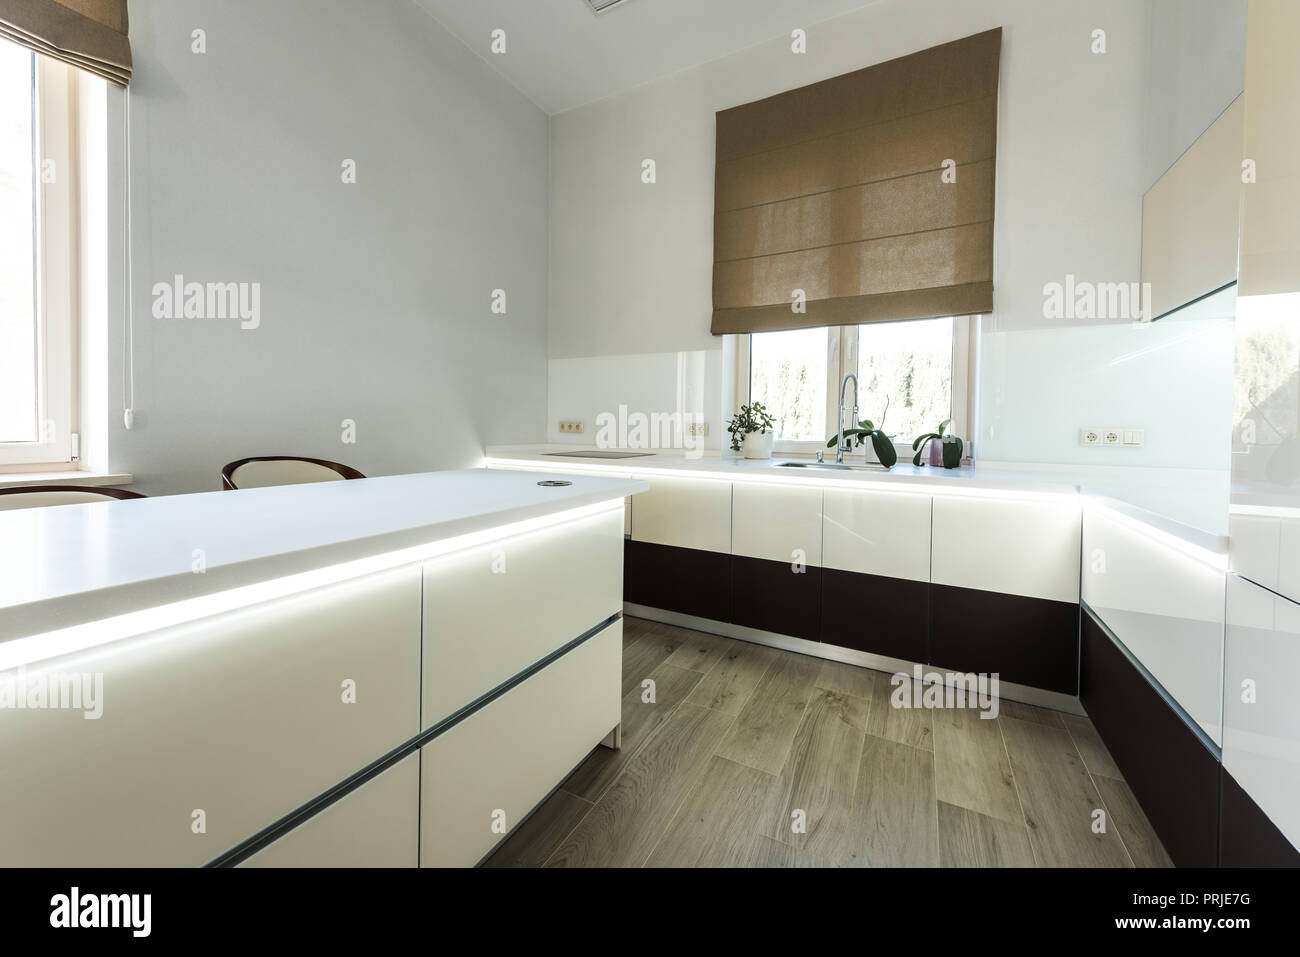 interior view of stylish kitchen in light colors Stock Photo